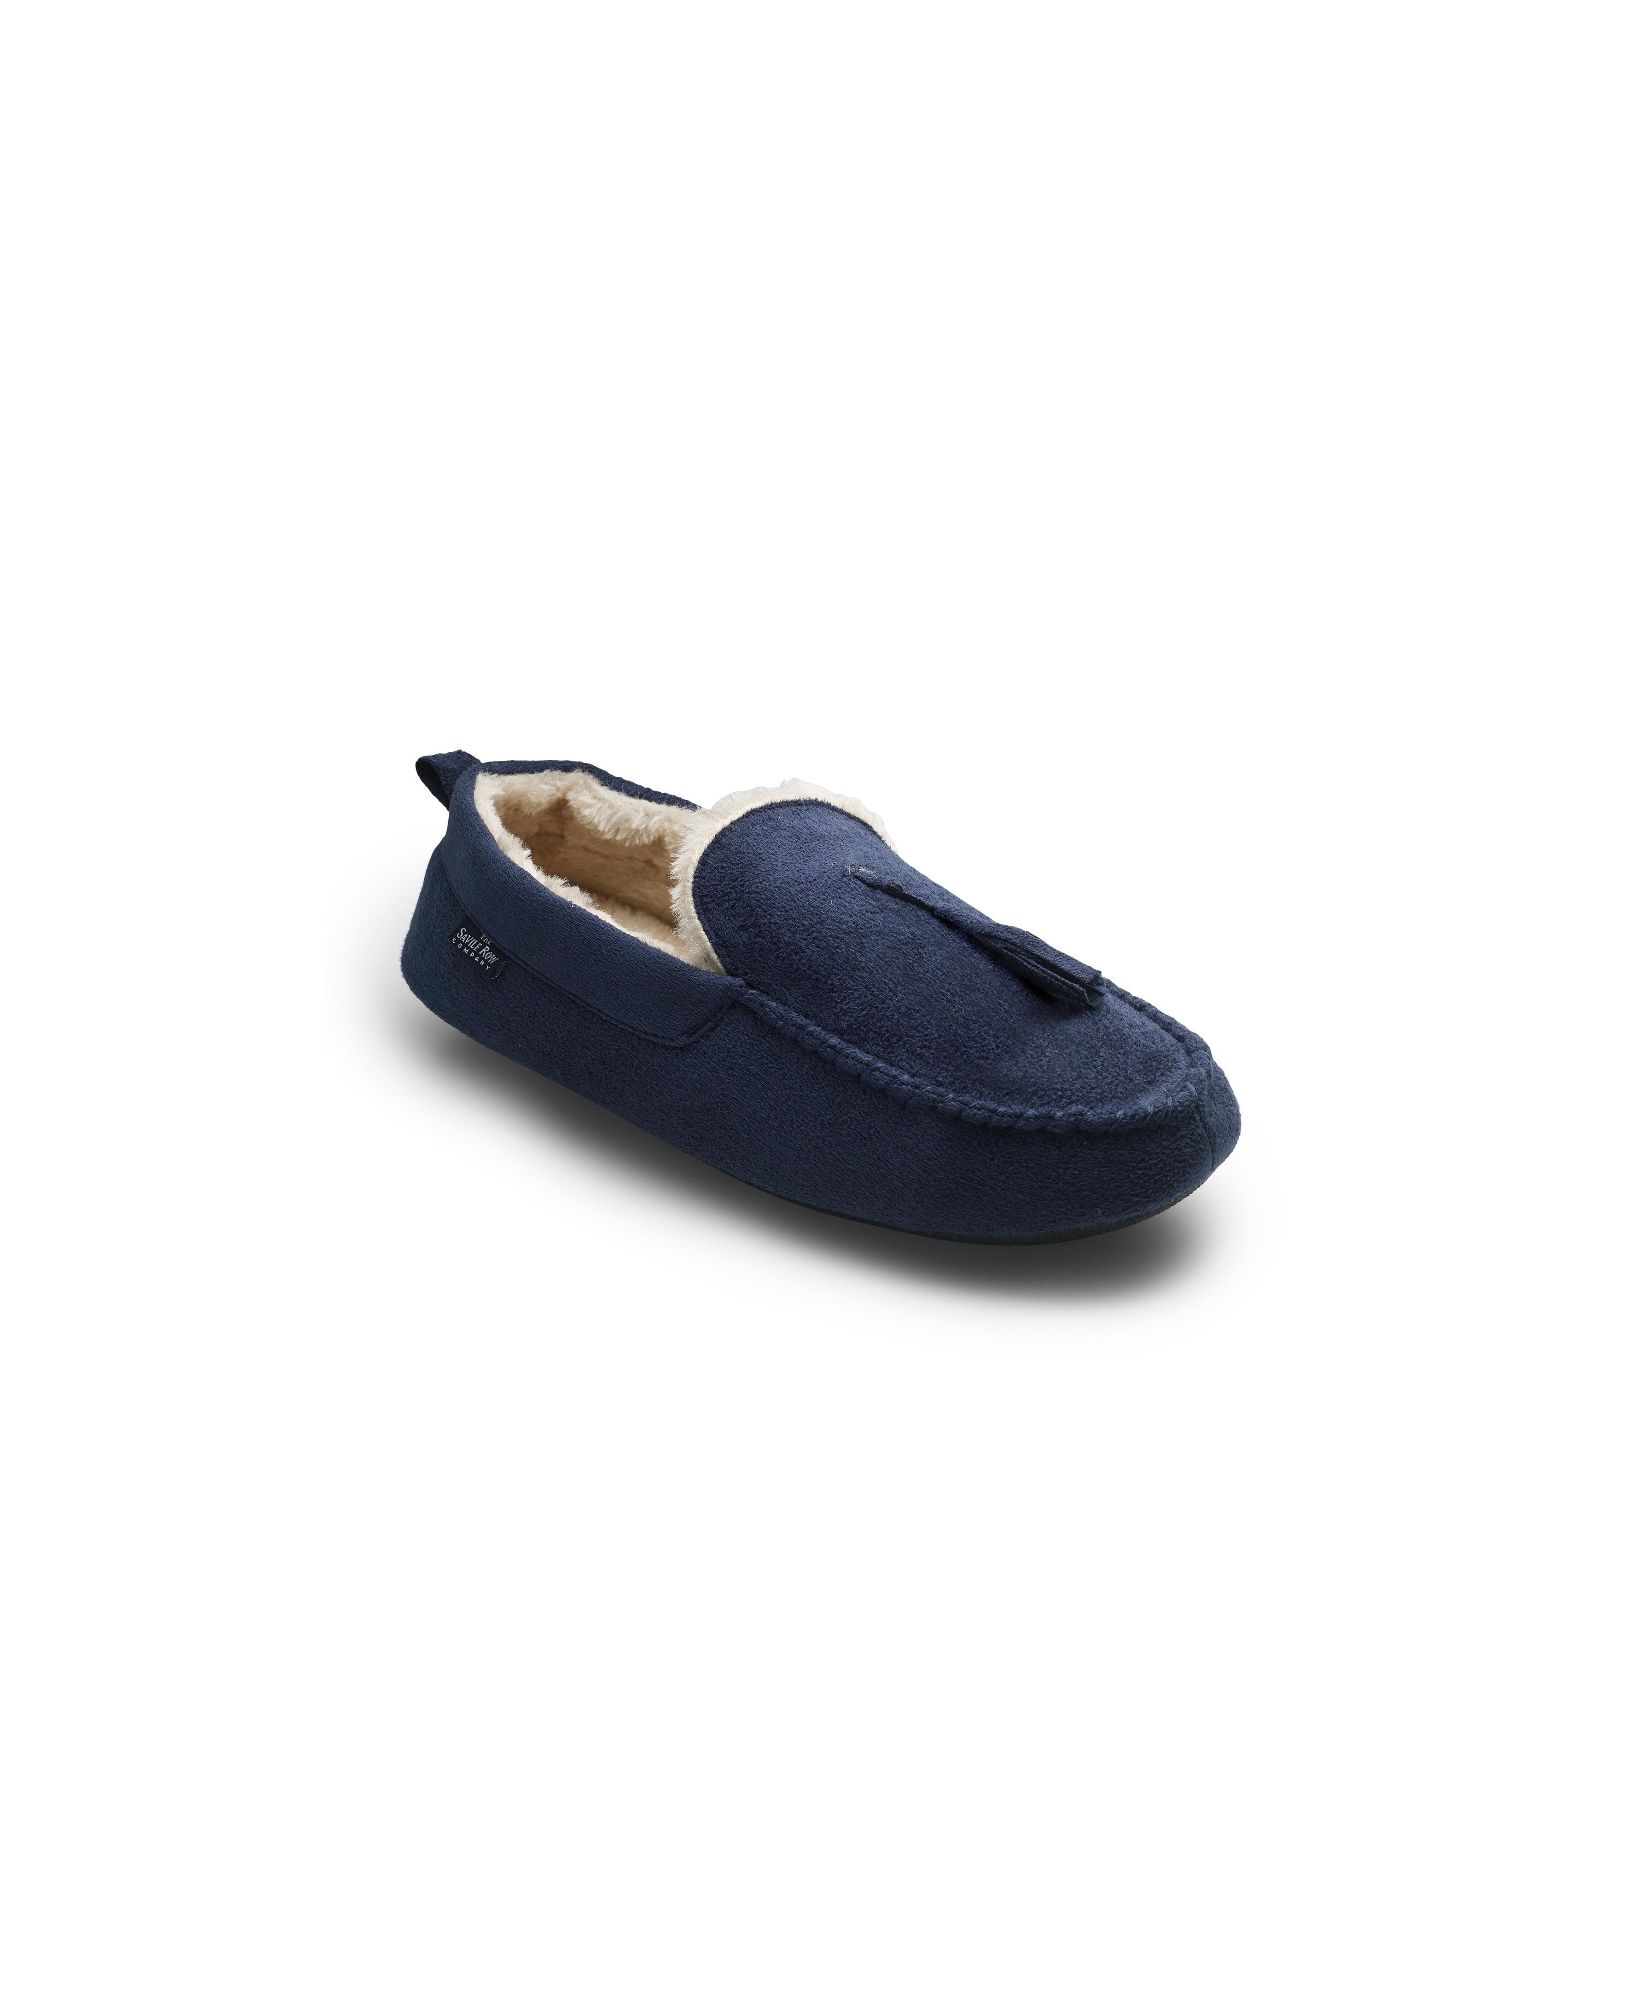 Navy Microsuede Moccasin Slippers 9